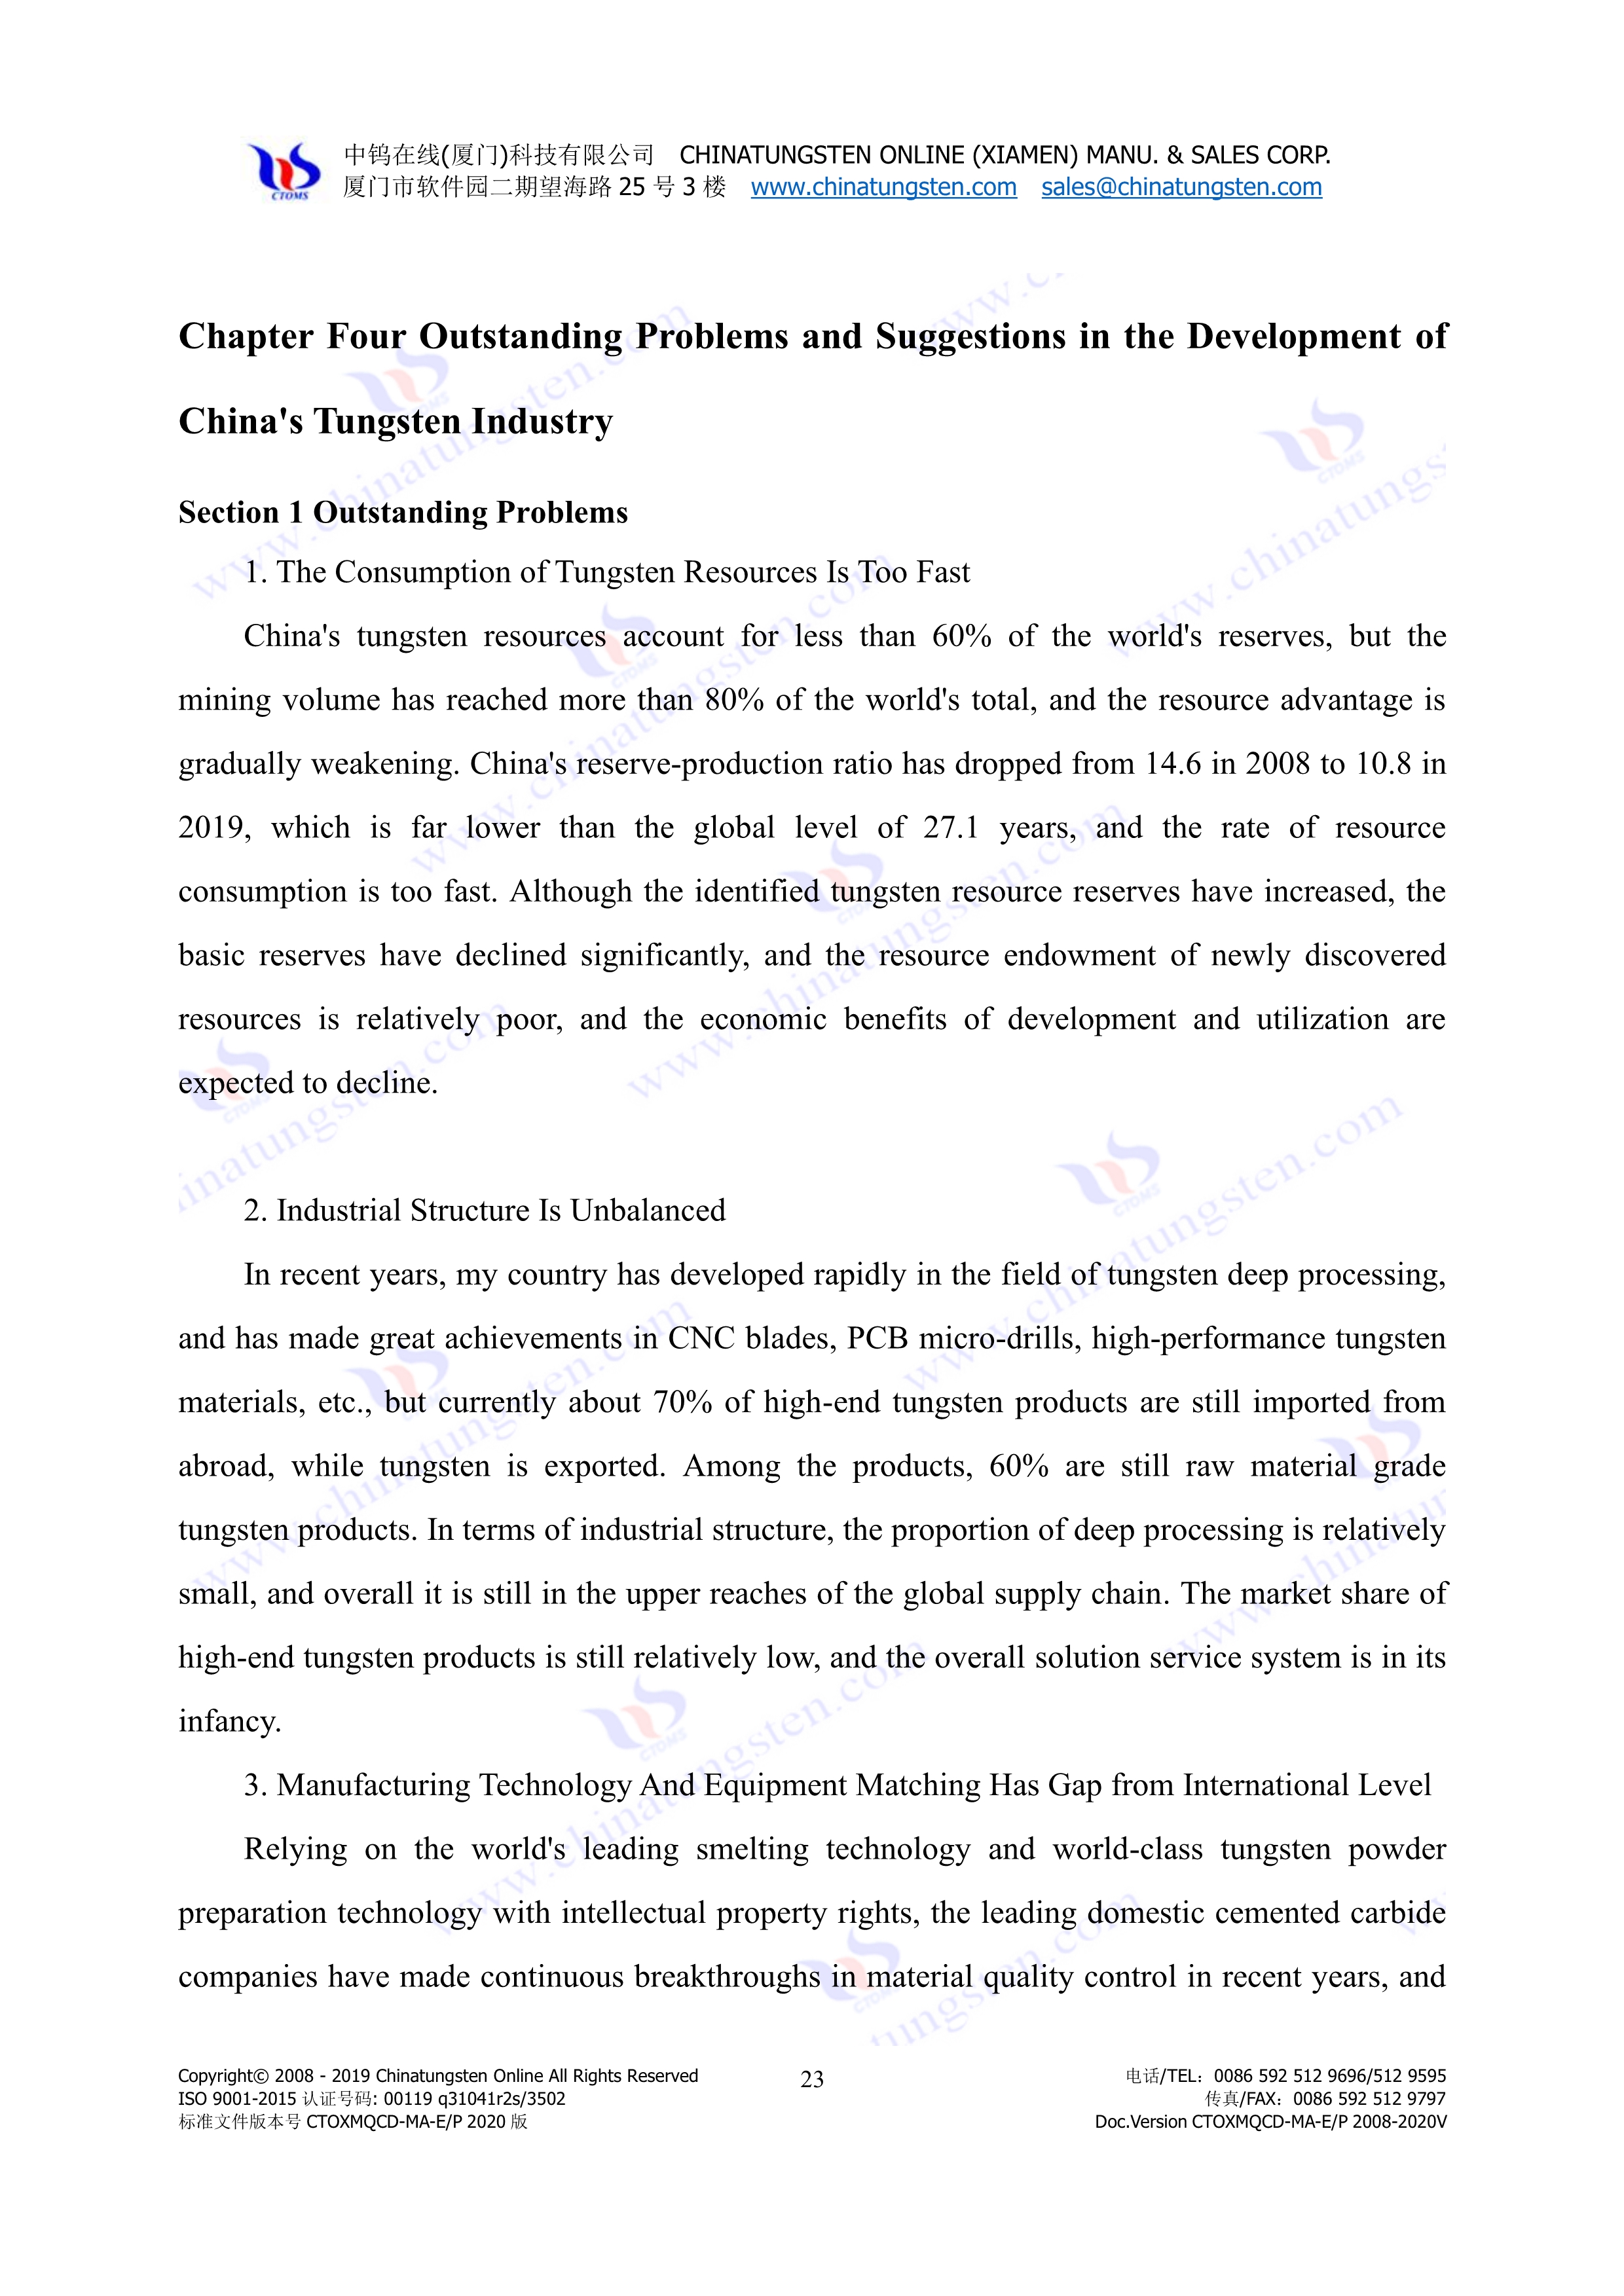 Outstanding Problems and Suggestions in the Development of China Tungsten Industry